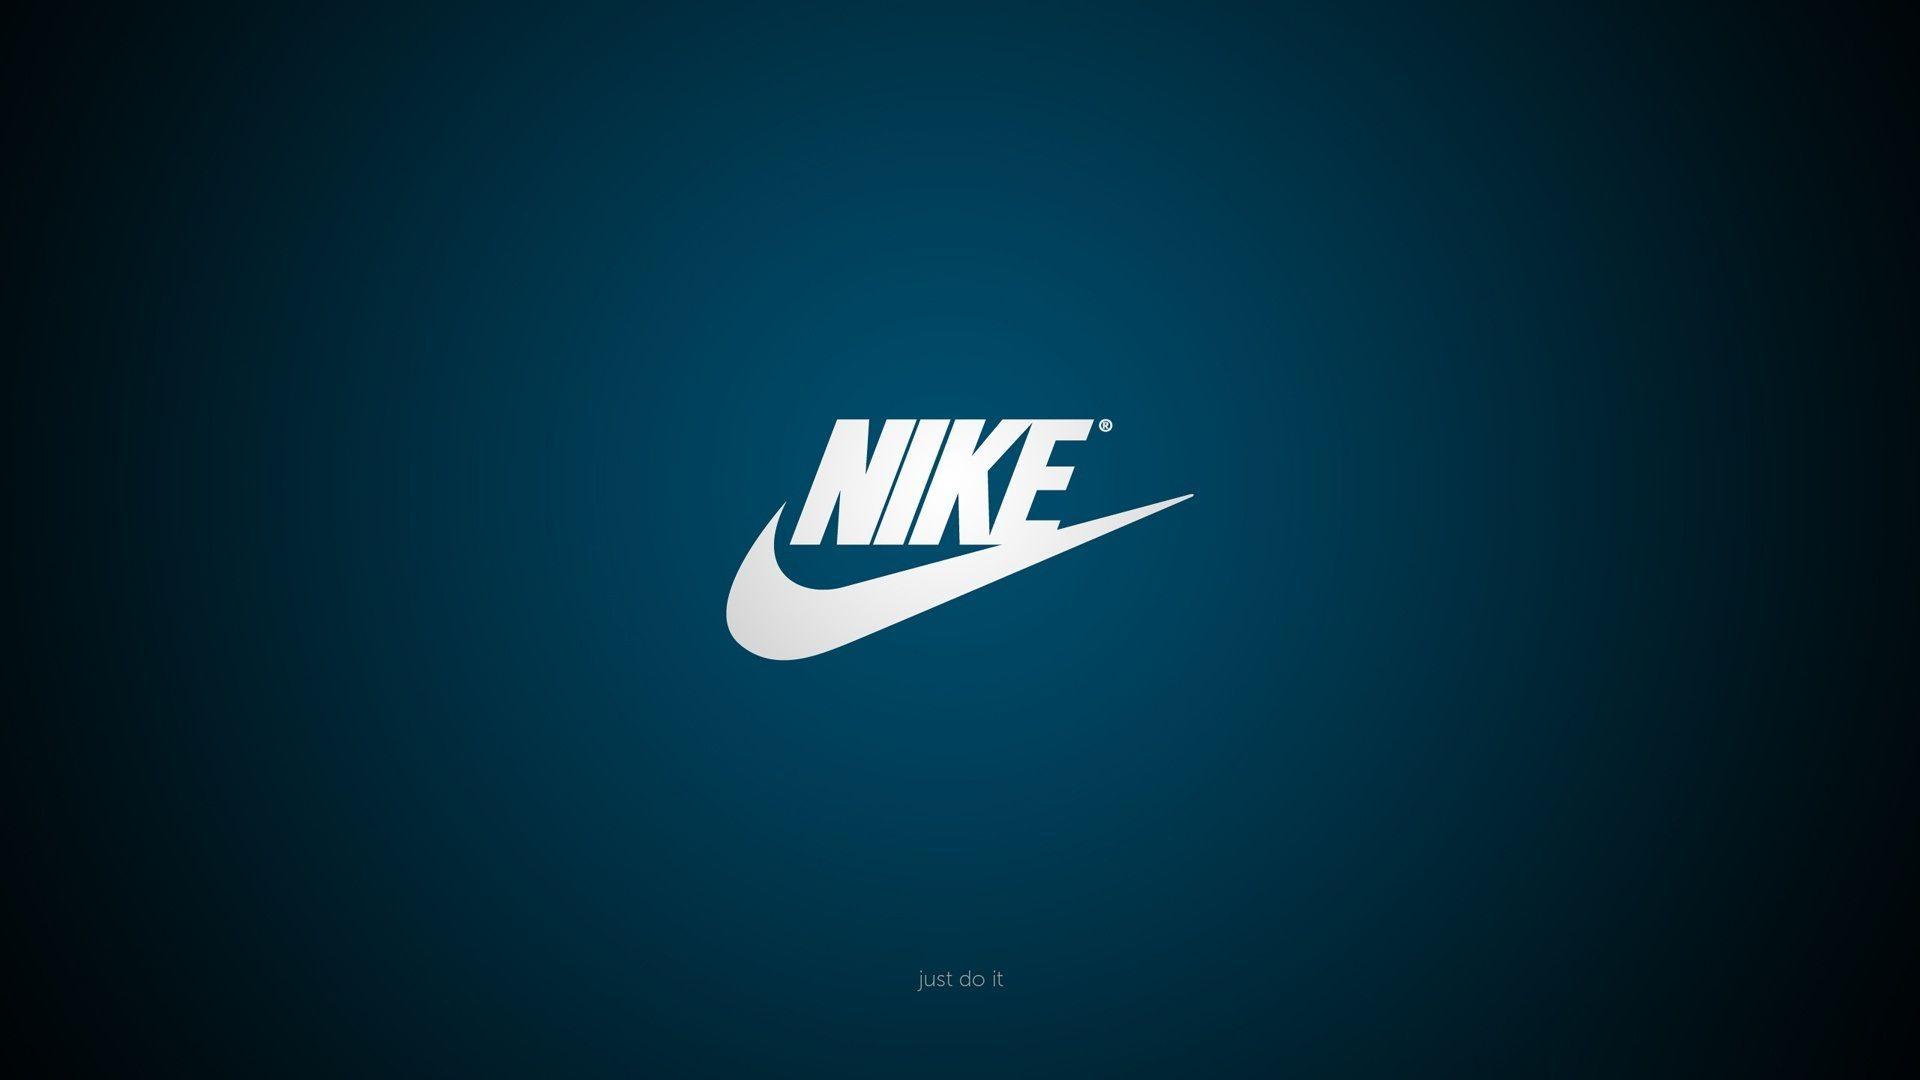 1920 x 1080 · jpeg - Nike Wallpapers For Laptop - Wallpaper Cave